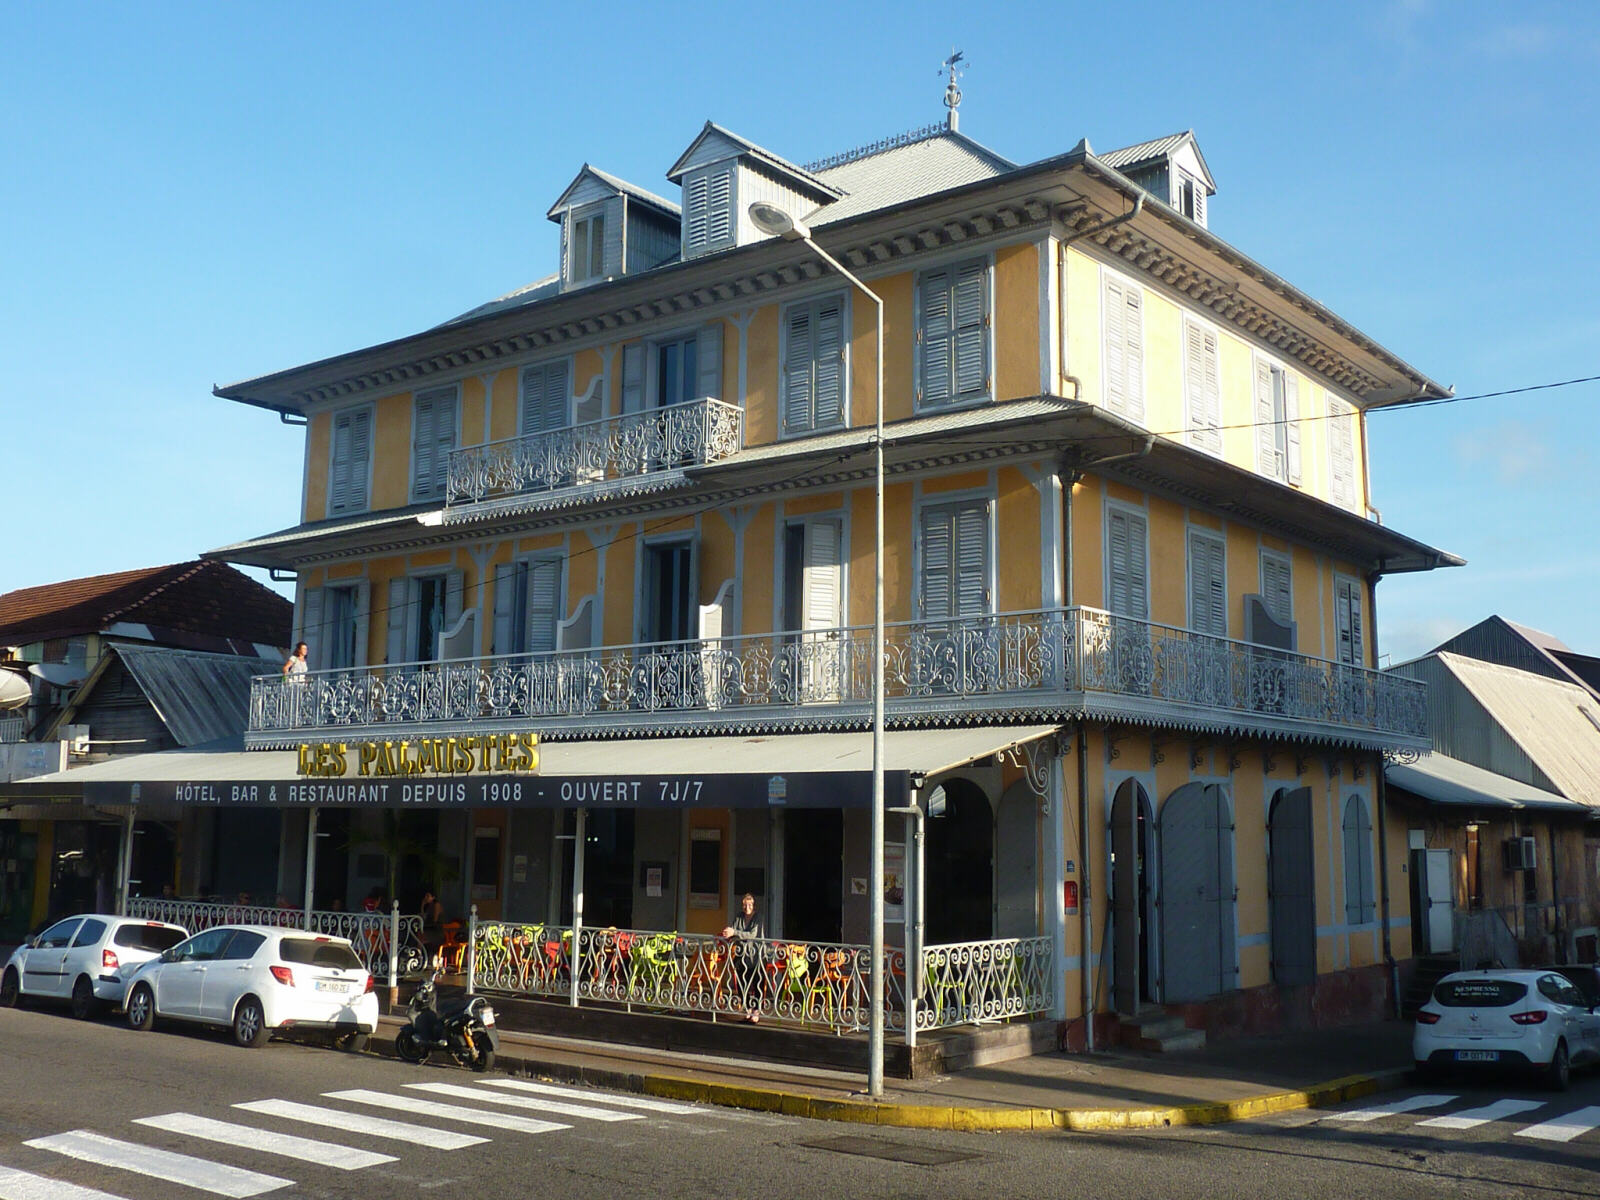 Les Palmistes hotel in Cayenne, French Guyane